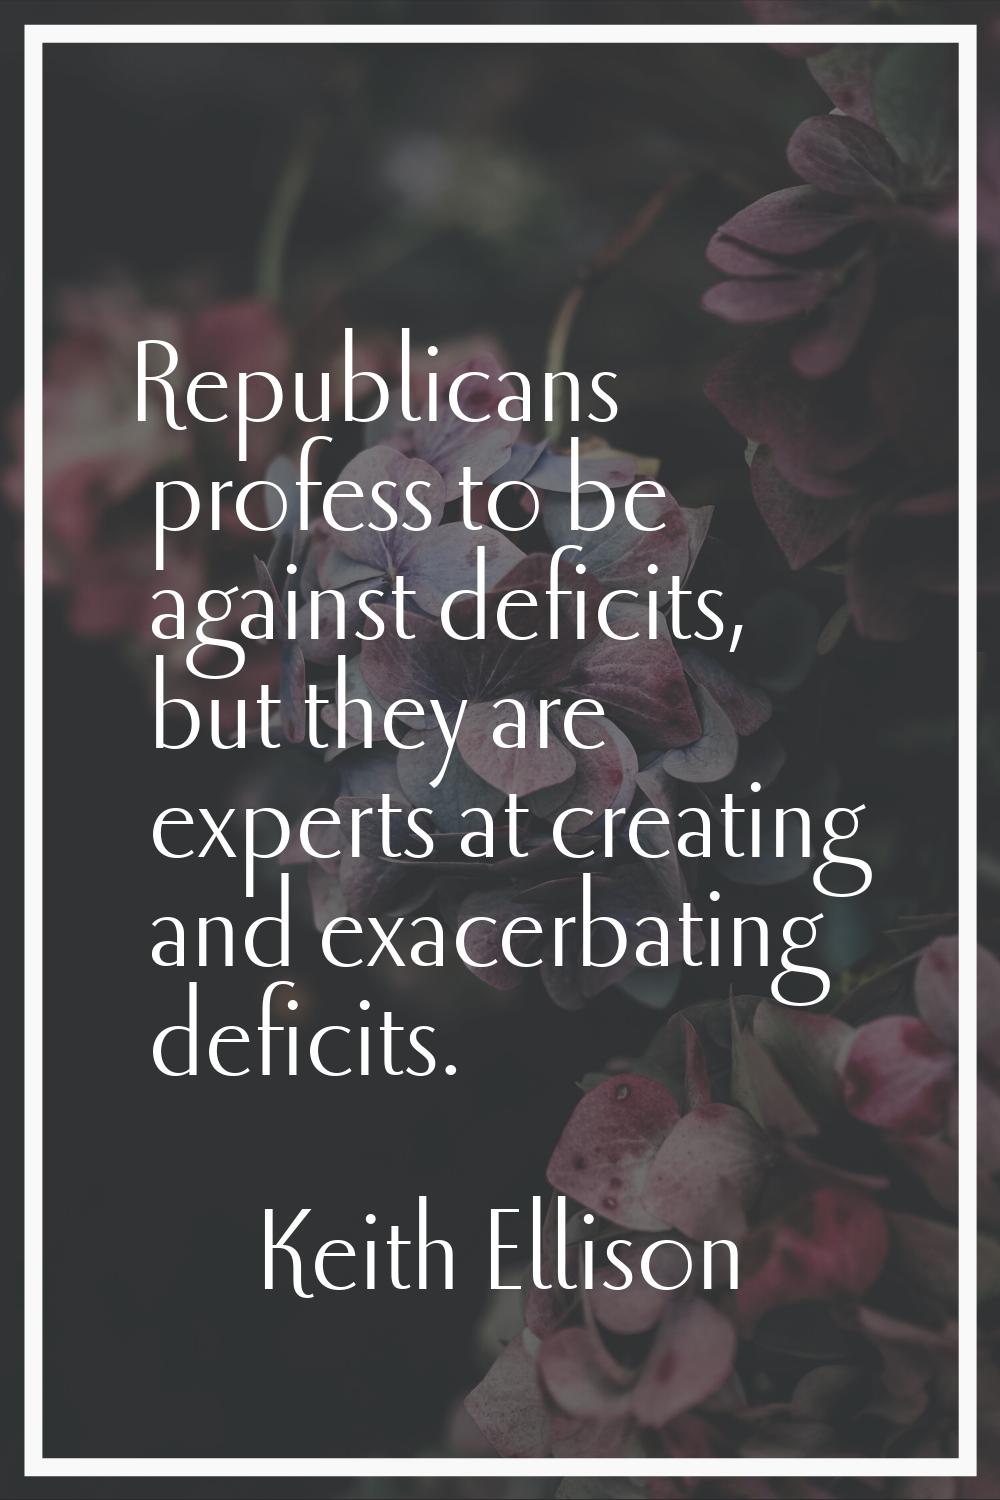 Republicans profess to be against deficits, but they are experts at creating and exacerbating defic